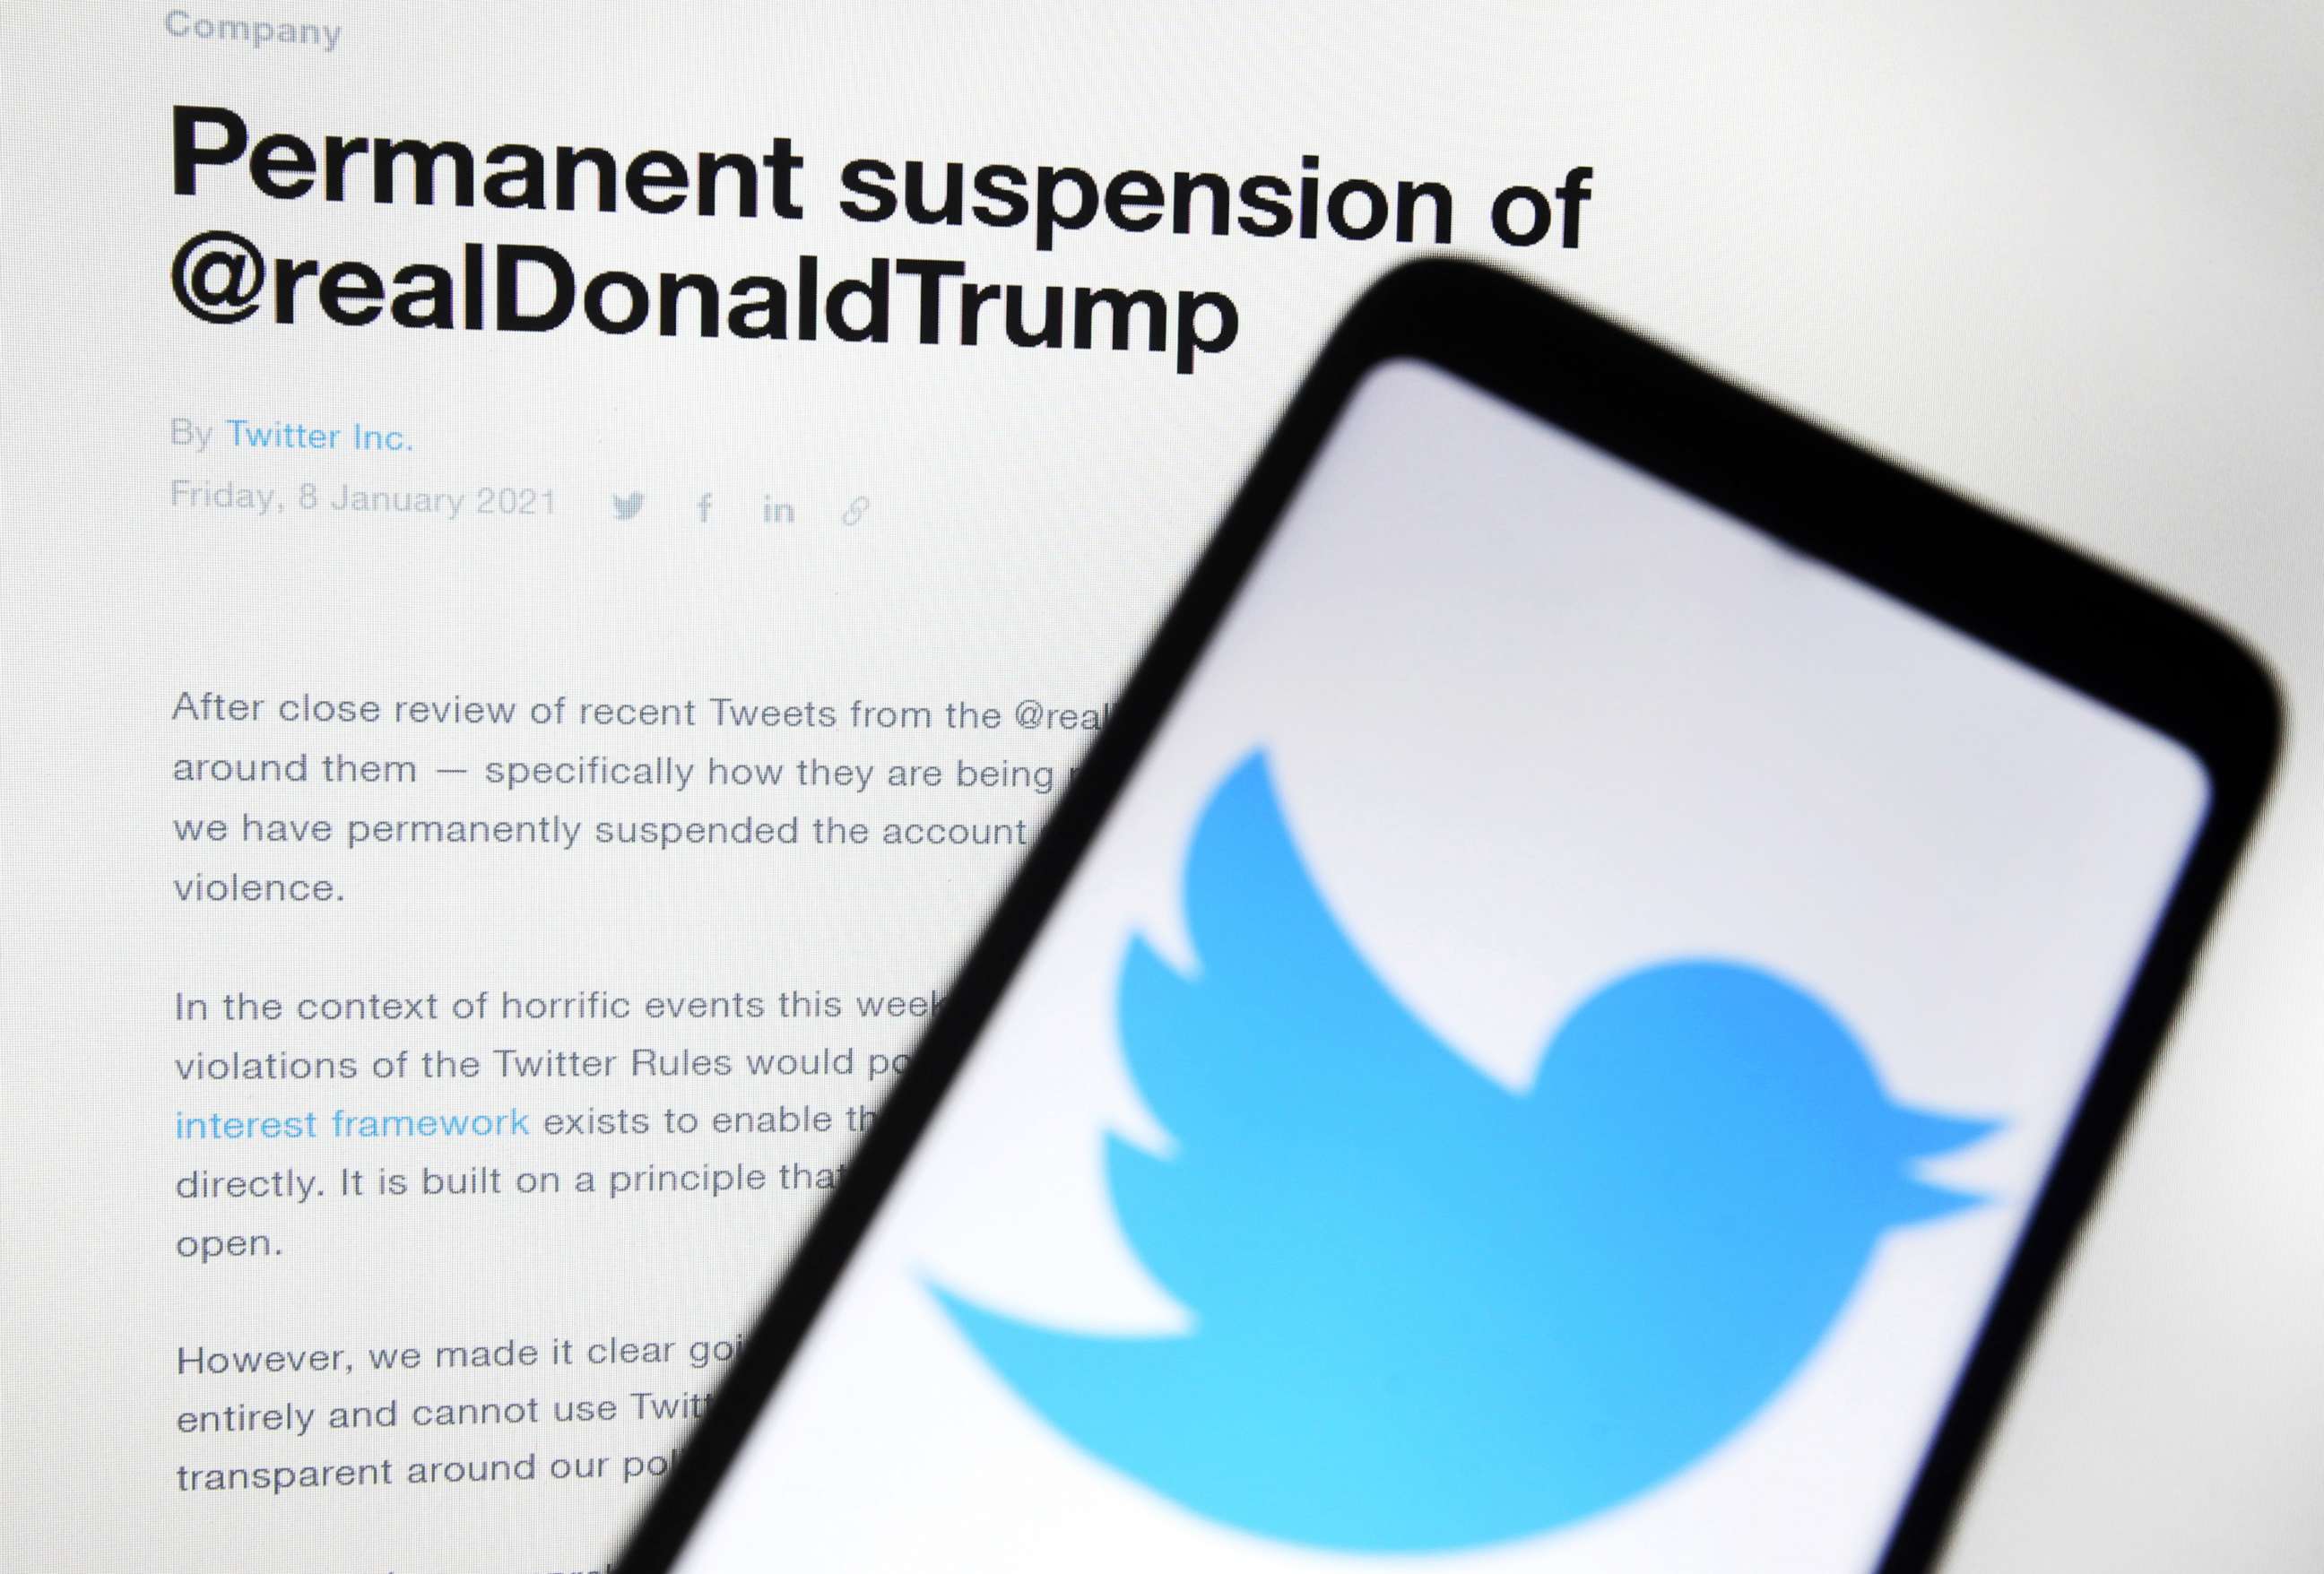 PHOTO: A'Permanent suspension of @realDonaldTrump' message is displayed on a Twitter website in front of a mobile phone with a Twitter logo in a photo illustration, Jan. 11, 2021.